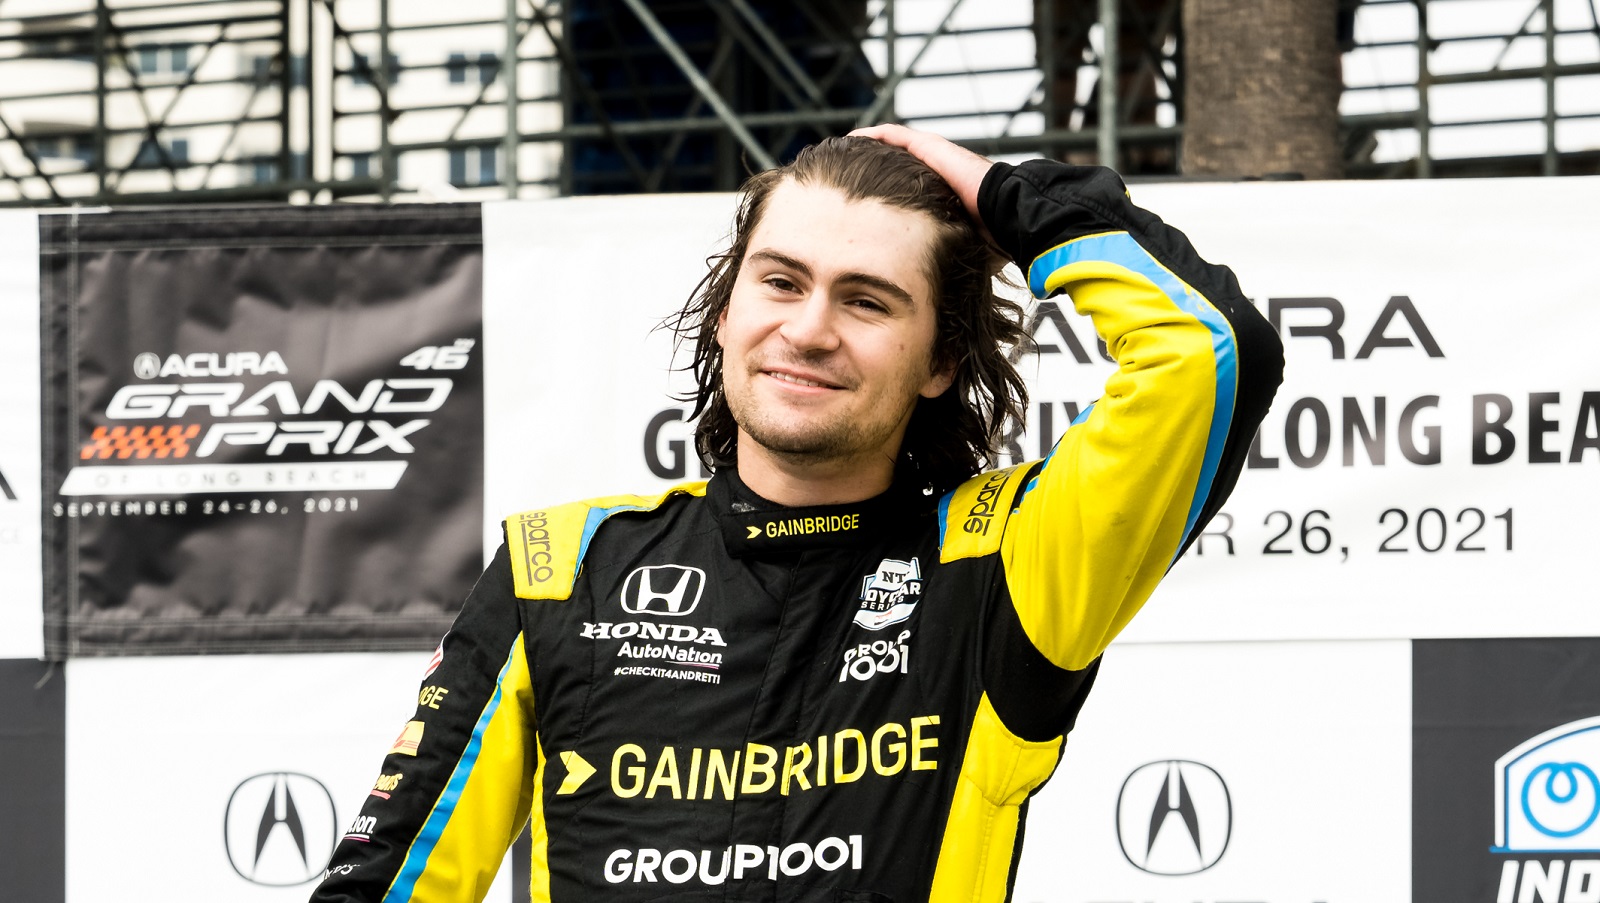 IndyCar driver Colton Herta after winning the Acura Grand Prix of Long Beach on Sept. 26, 2021, in Long Beach, California.